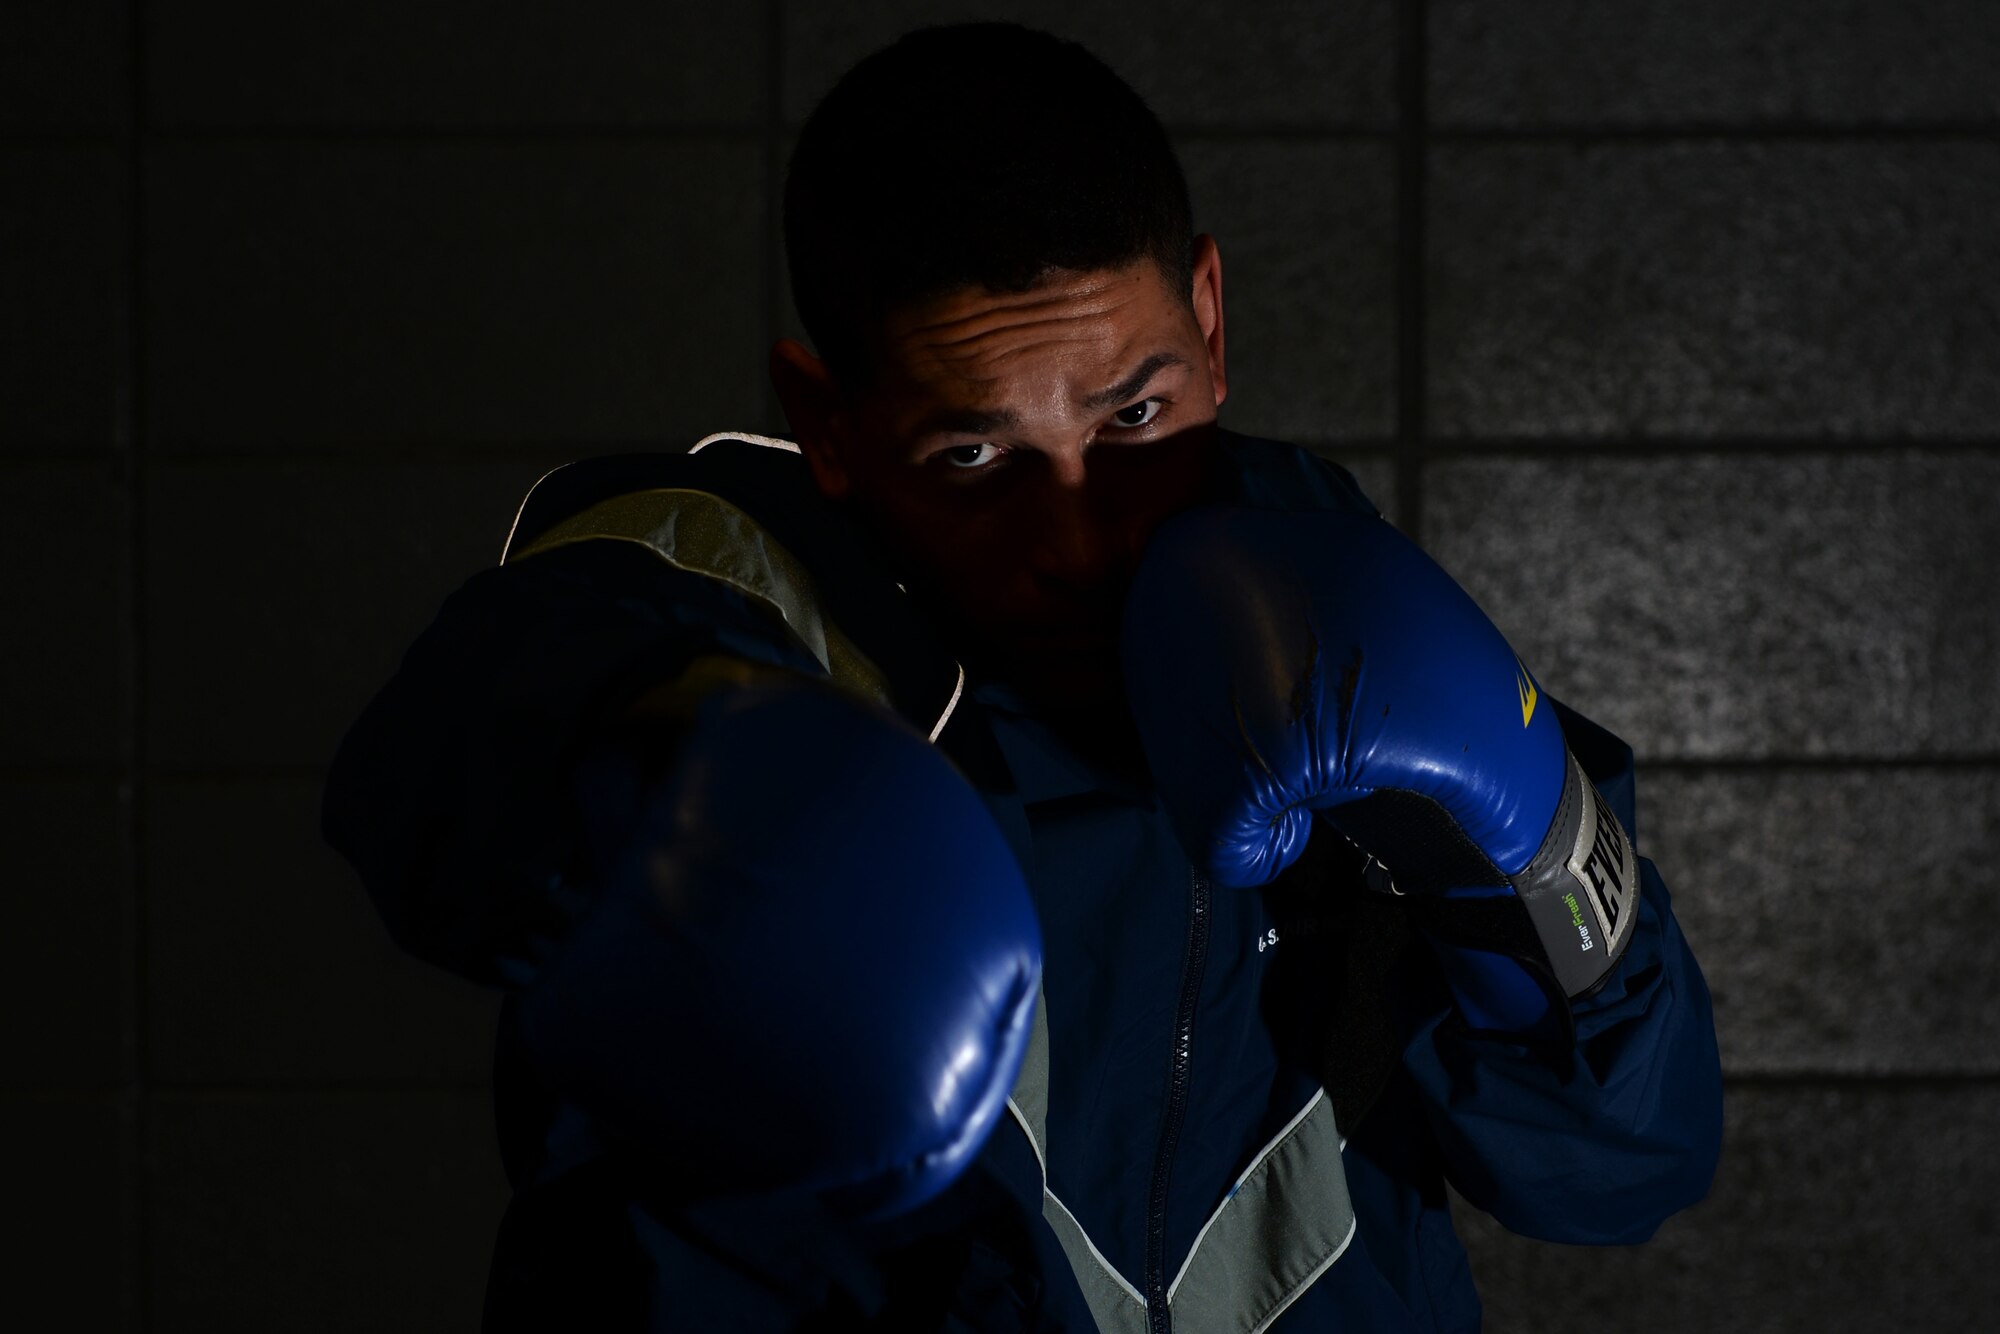 First Lt. Christian Torres, a 81st Comptroller Squadron deputy project officer, throws a right hook at the Triangle Gym on March 3, 2016, at Keesler Air Force Base, Miss. Torres boxed recreationally and had the opportunity to become a professional boxer, however, due to family needs he chose his current path in the Air Force. (U.S. Air Force Photo/Airman 1st Class Travis Beihl)